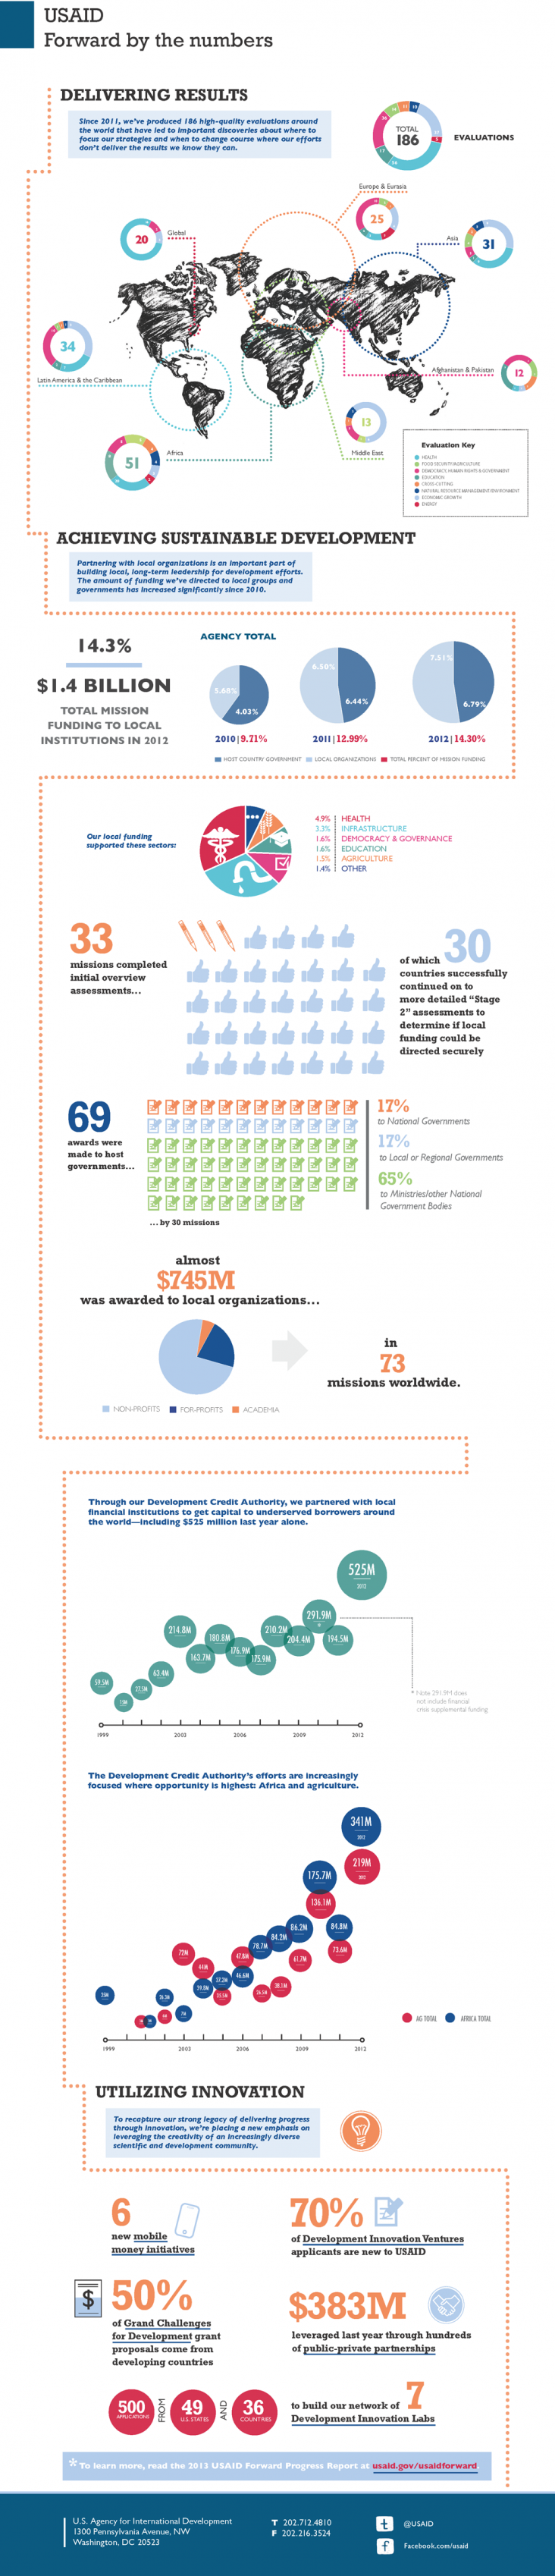 Infographic: USAID Forward Delivering Results -By the Numbers